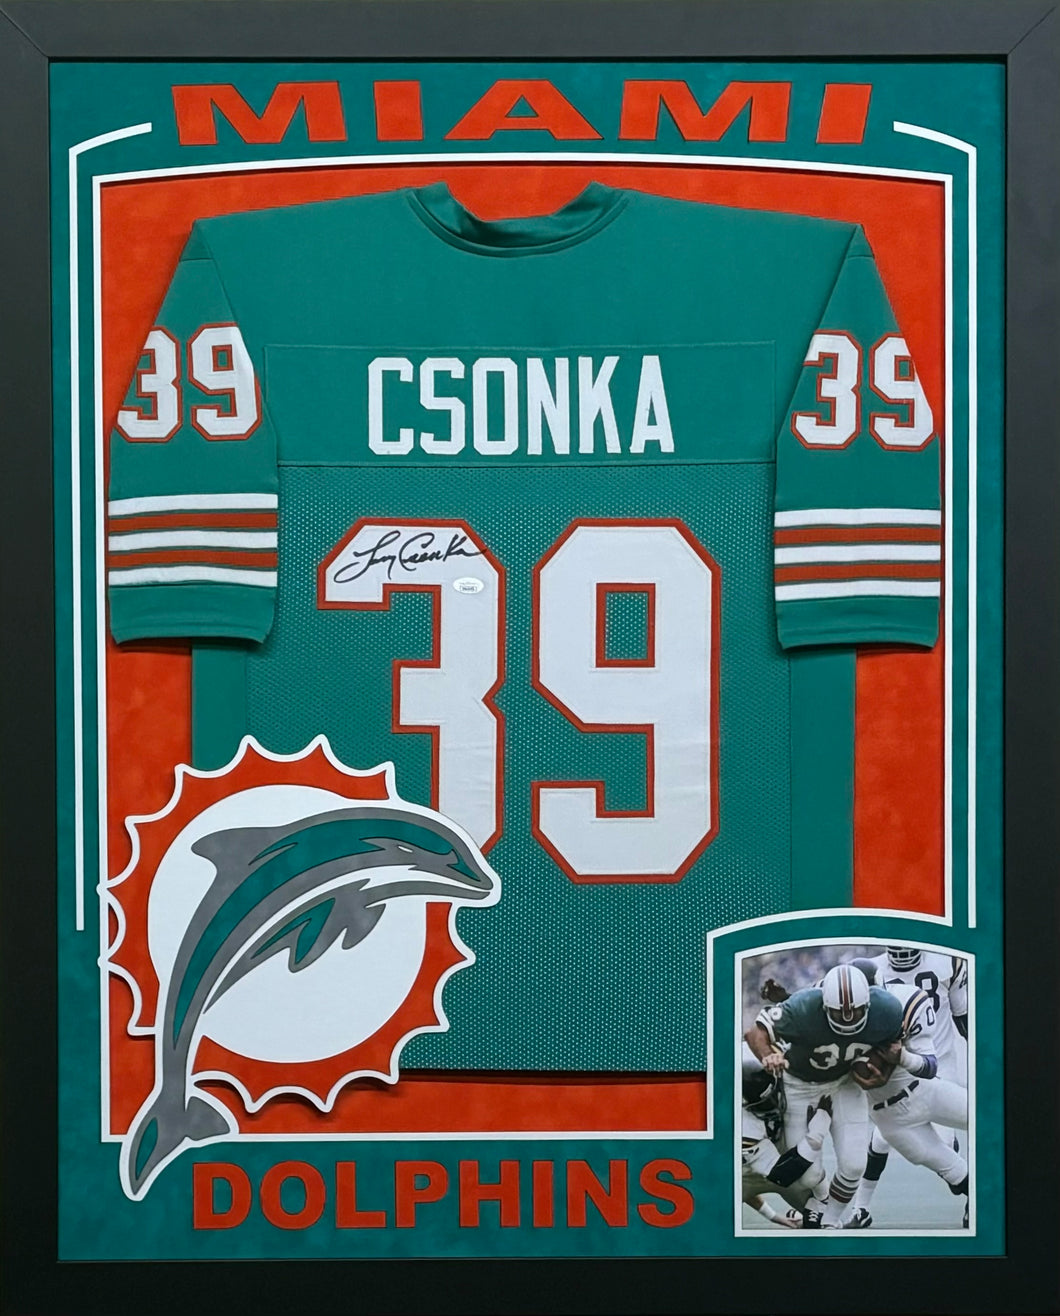 Miami Dolphins Larry Csonka Signed Teal Jersey Framed & Suede Matted with XL 3D Logo & Team Name Cutout JSA COA